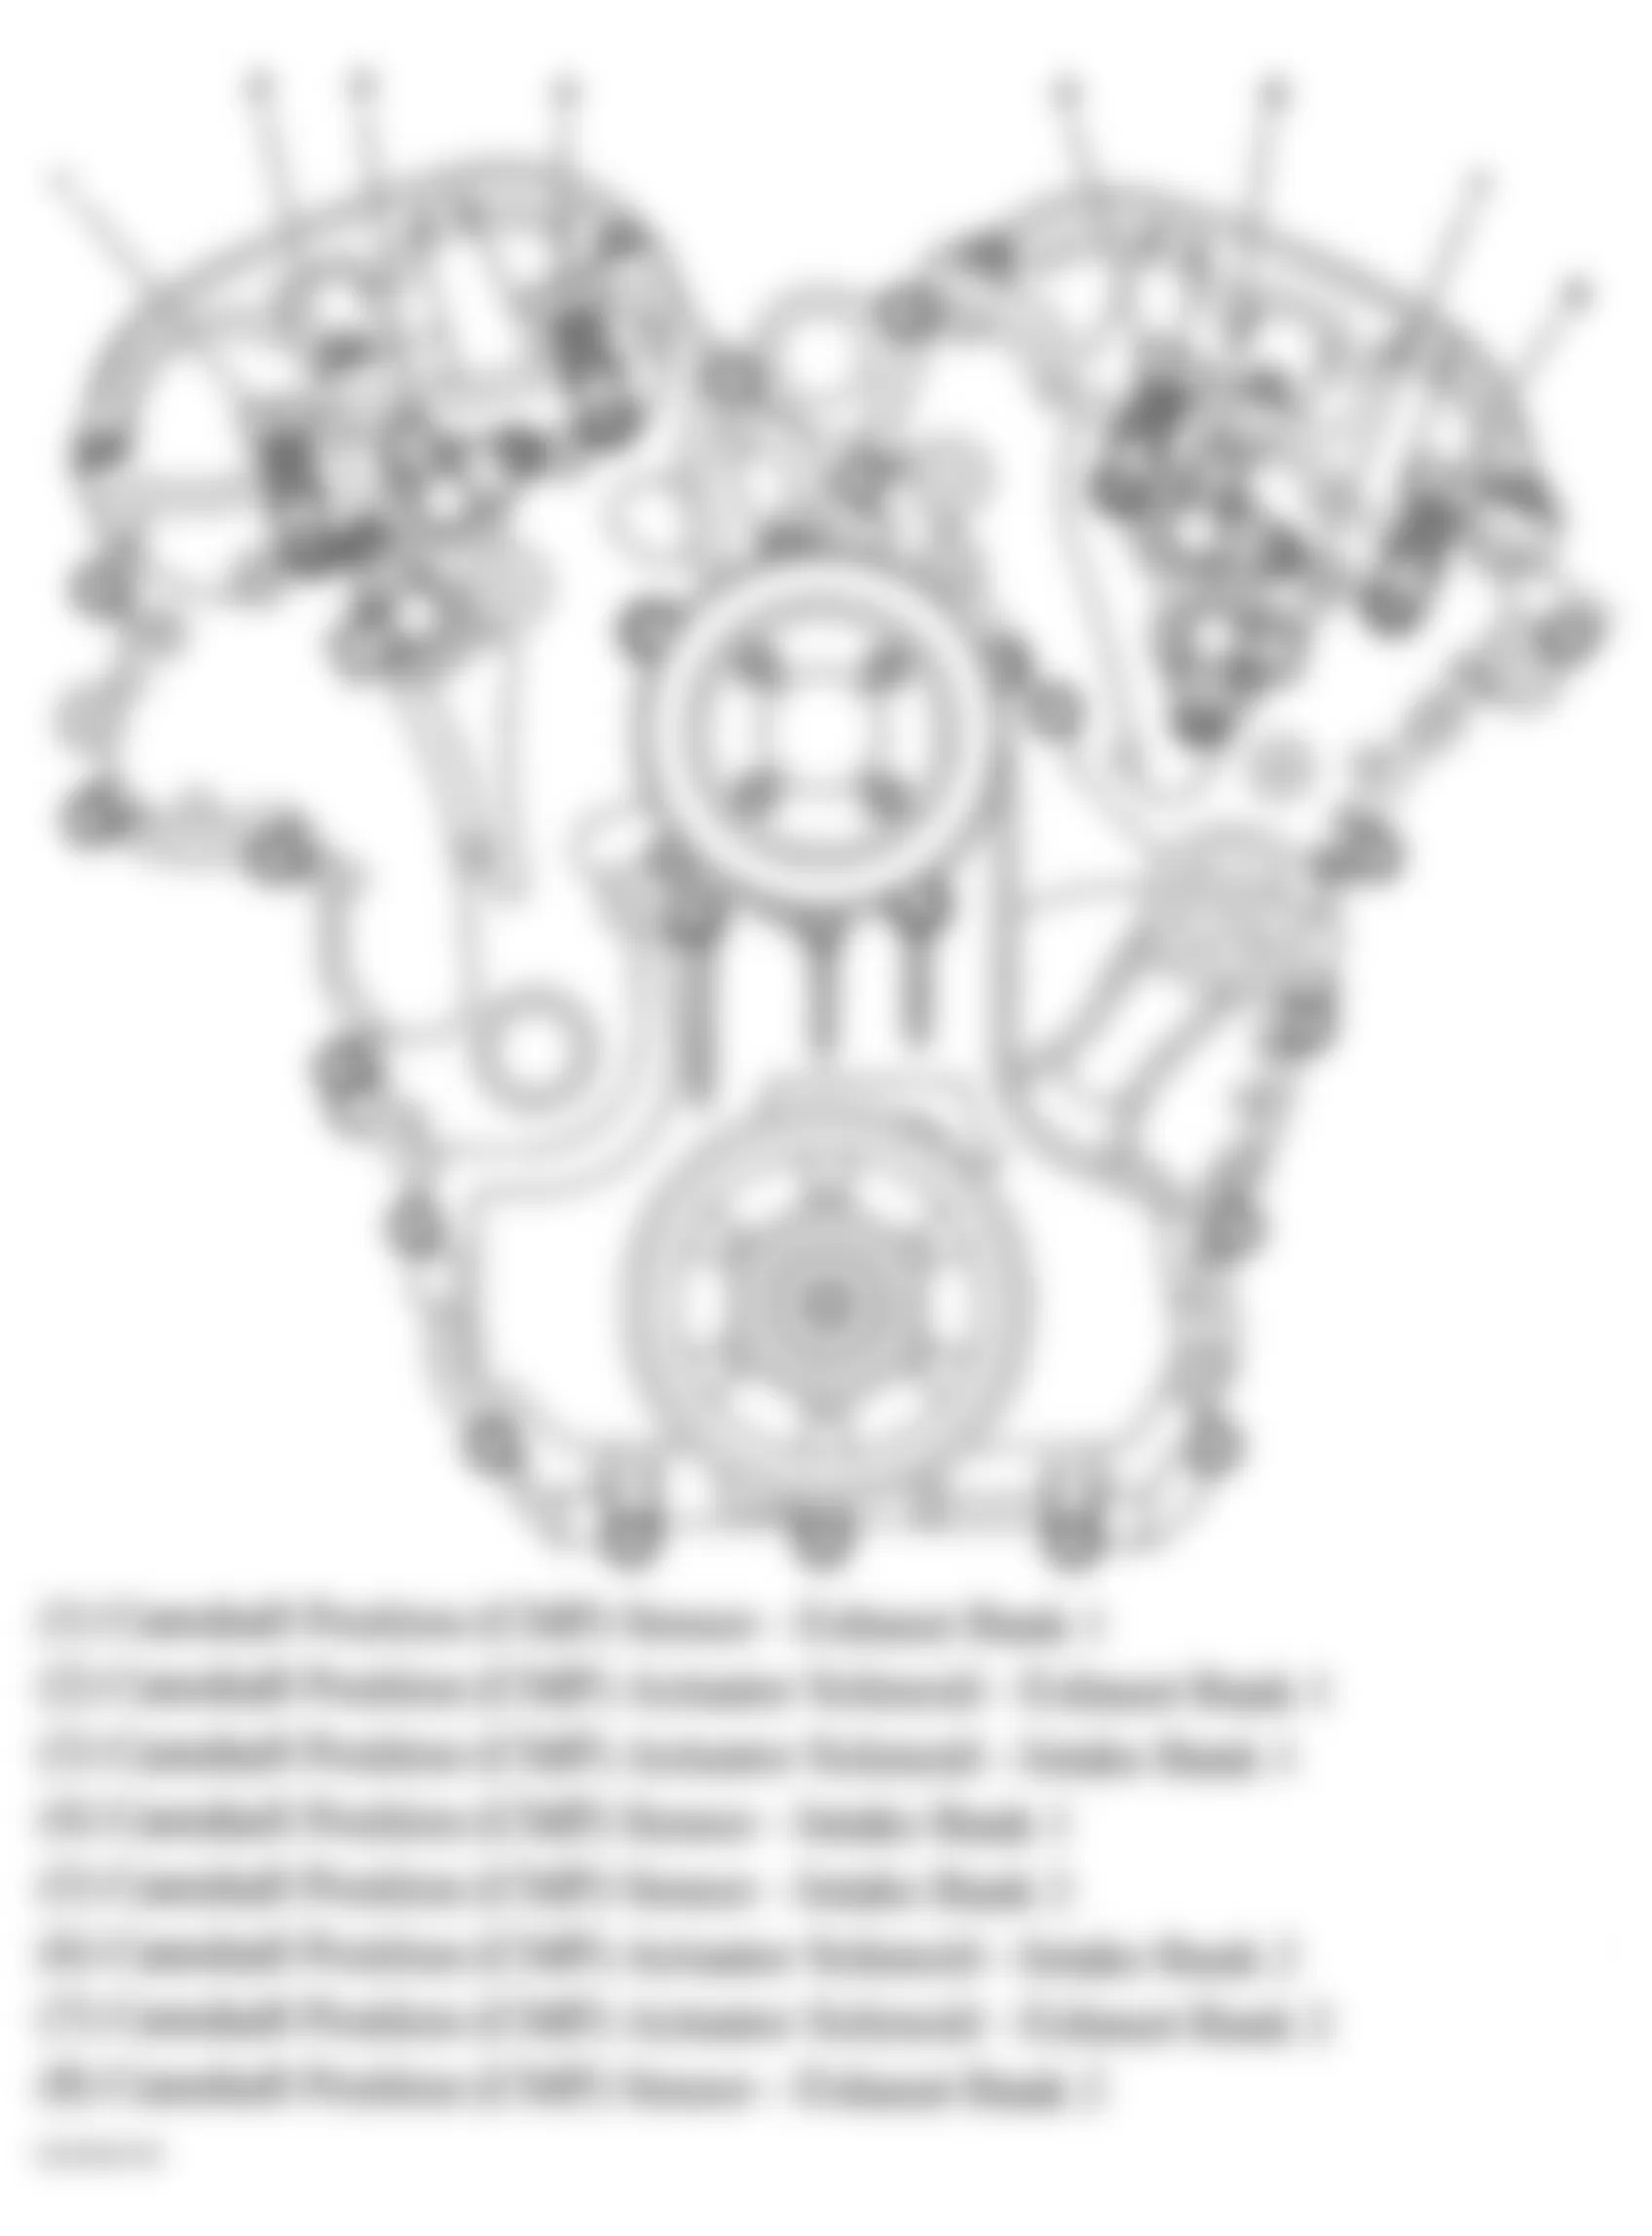 Buick LaCrosse CXL 2007 - Component Locations -  Front Of Engine (3.6L)